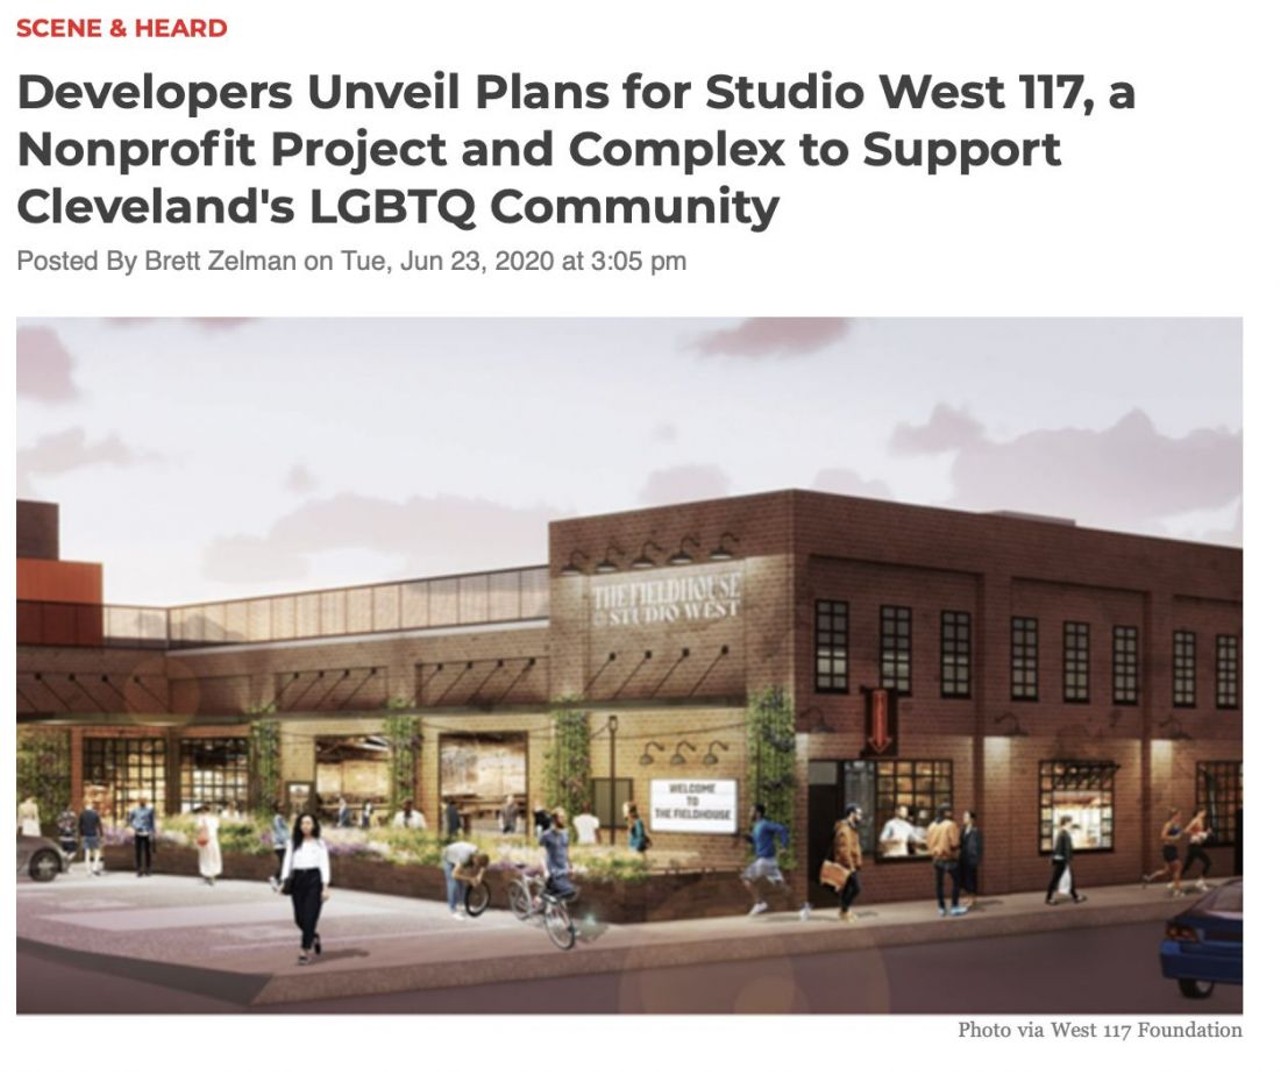  &#147;Developers Unveil Plans for Studio West 117, a Nonprofit Project and Complex to Support Cleveland's LGBTQ Community&#148;
June 23rd
&#147;Studio West 117 will focus on philanthropy, health and wellness, arts and culture and entrepreneurship in a response to the needs of the local LGBTQ community. The space will house LGBTQ-oriented entertainment and dining venues alongside other LGBTQ businesses and social services.&#146;&#148;
Photo via Scene Archives